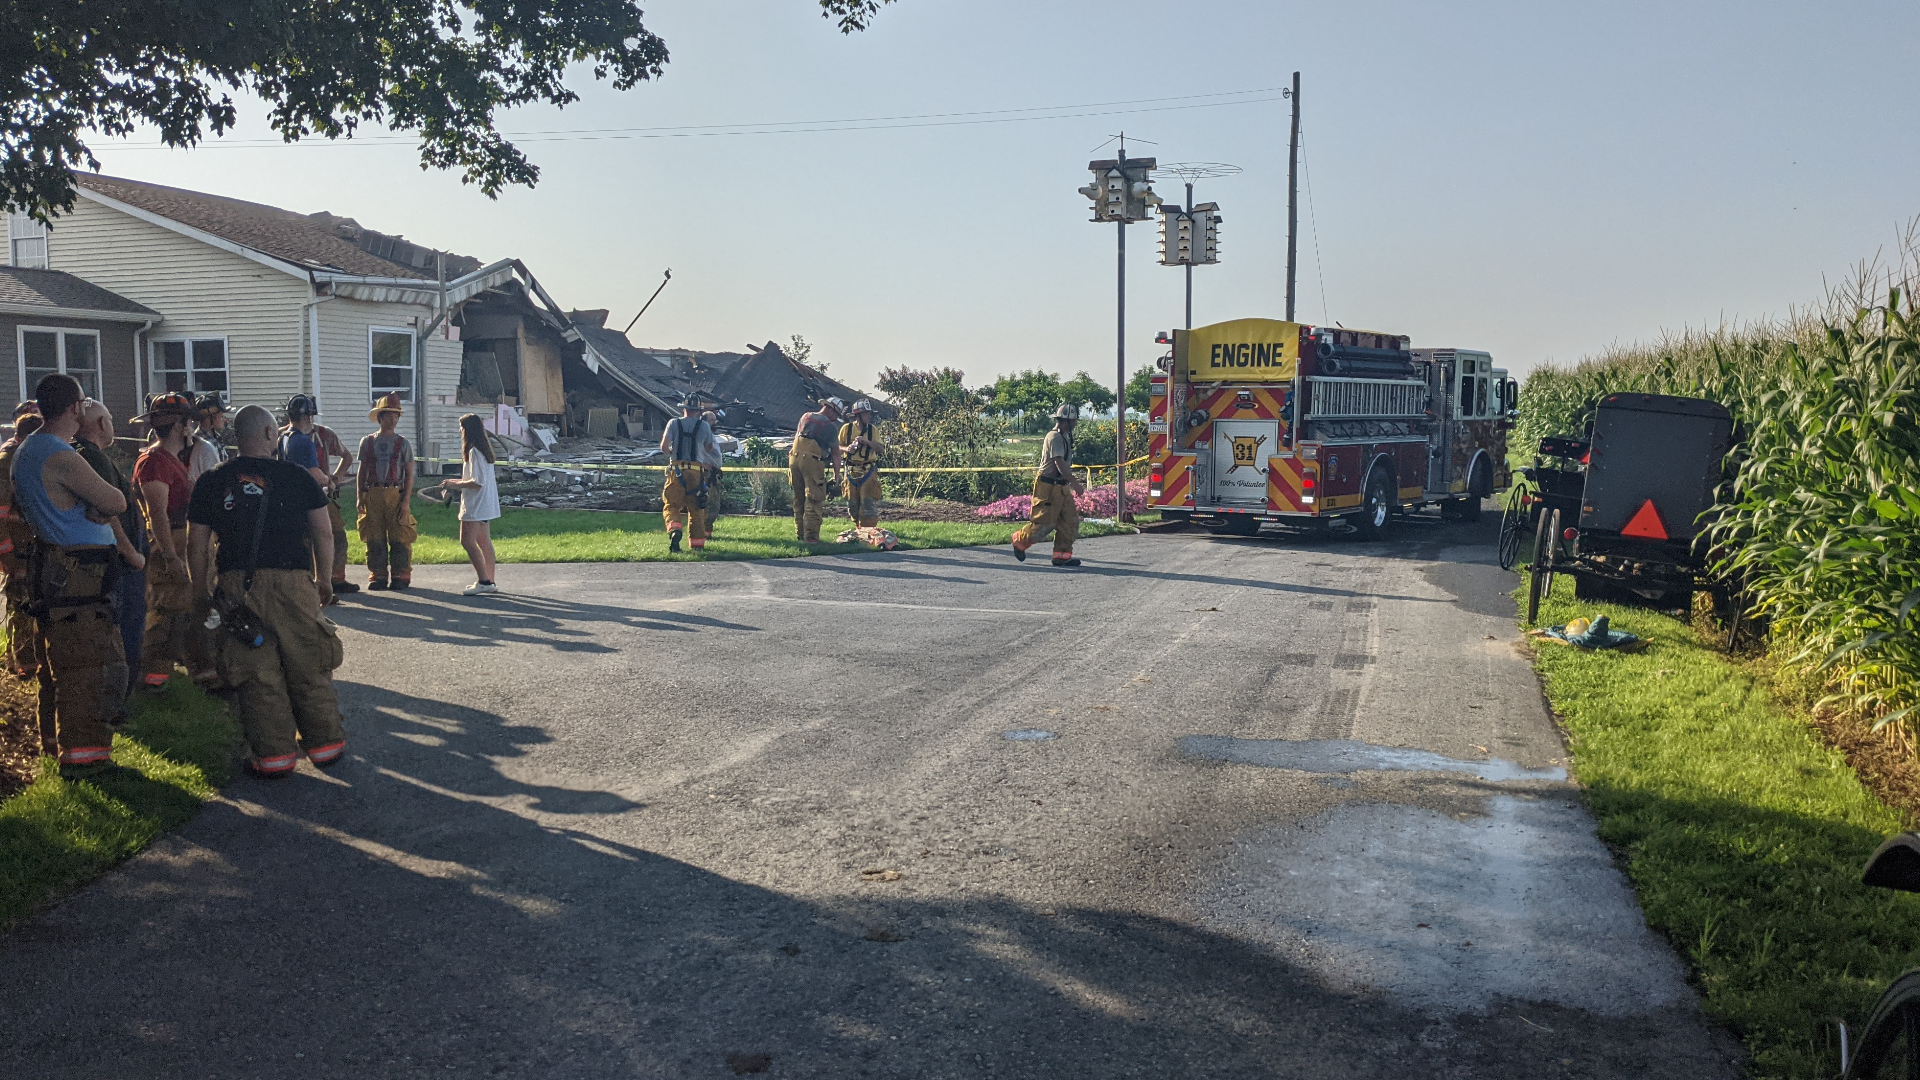 A man was injured after a building fire and explosion in Jackson Township on Wednesday morning.